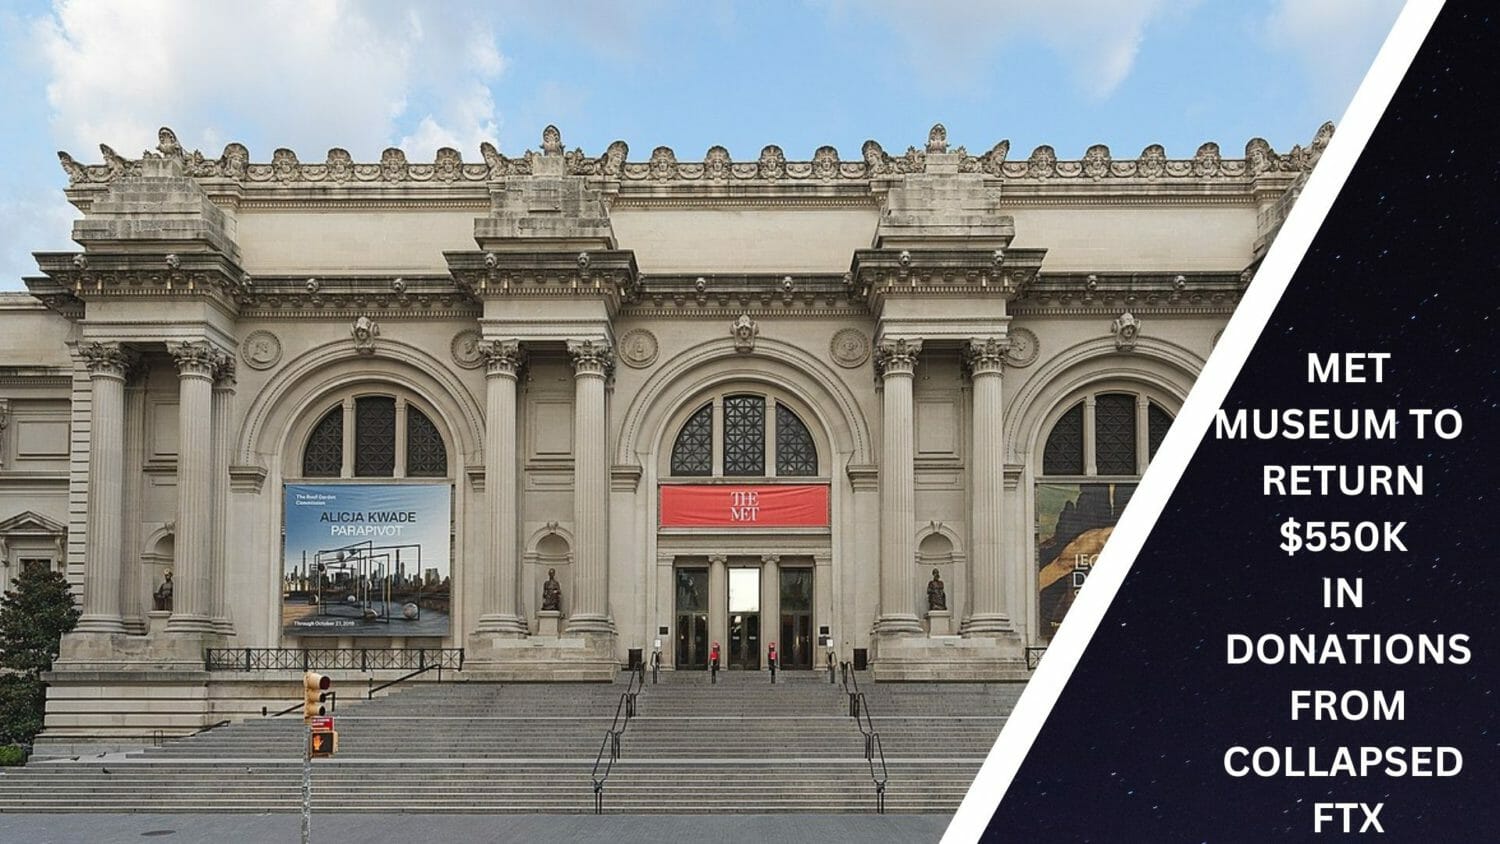 New York’s Met Museum To Return $550K In Donations From Collapsed Ftx